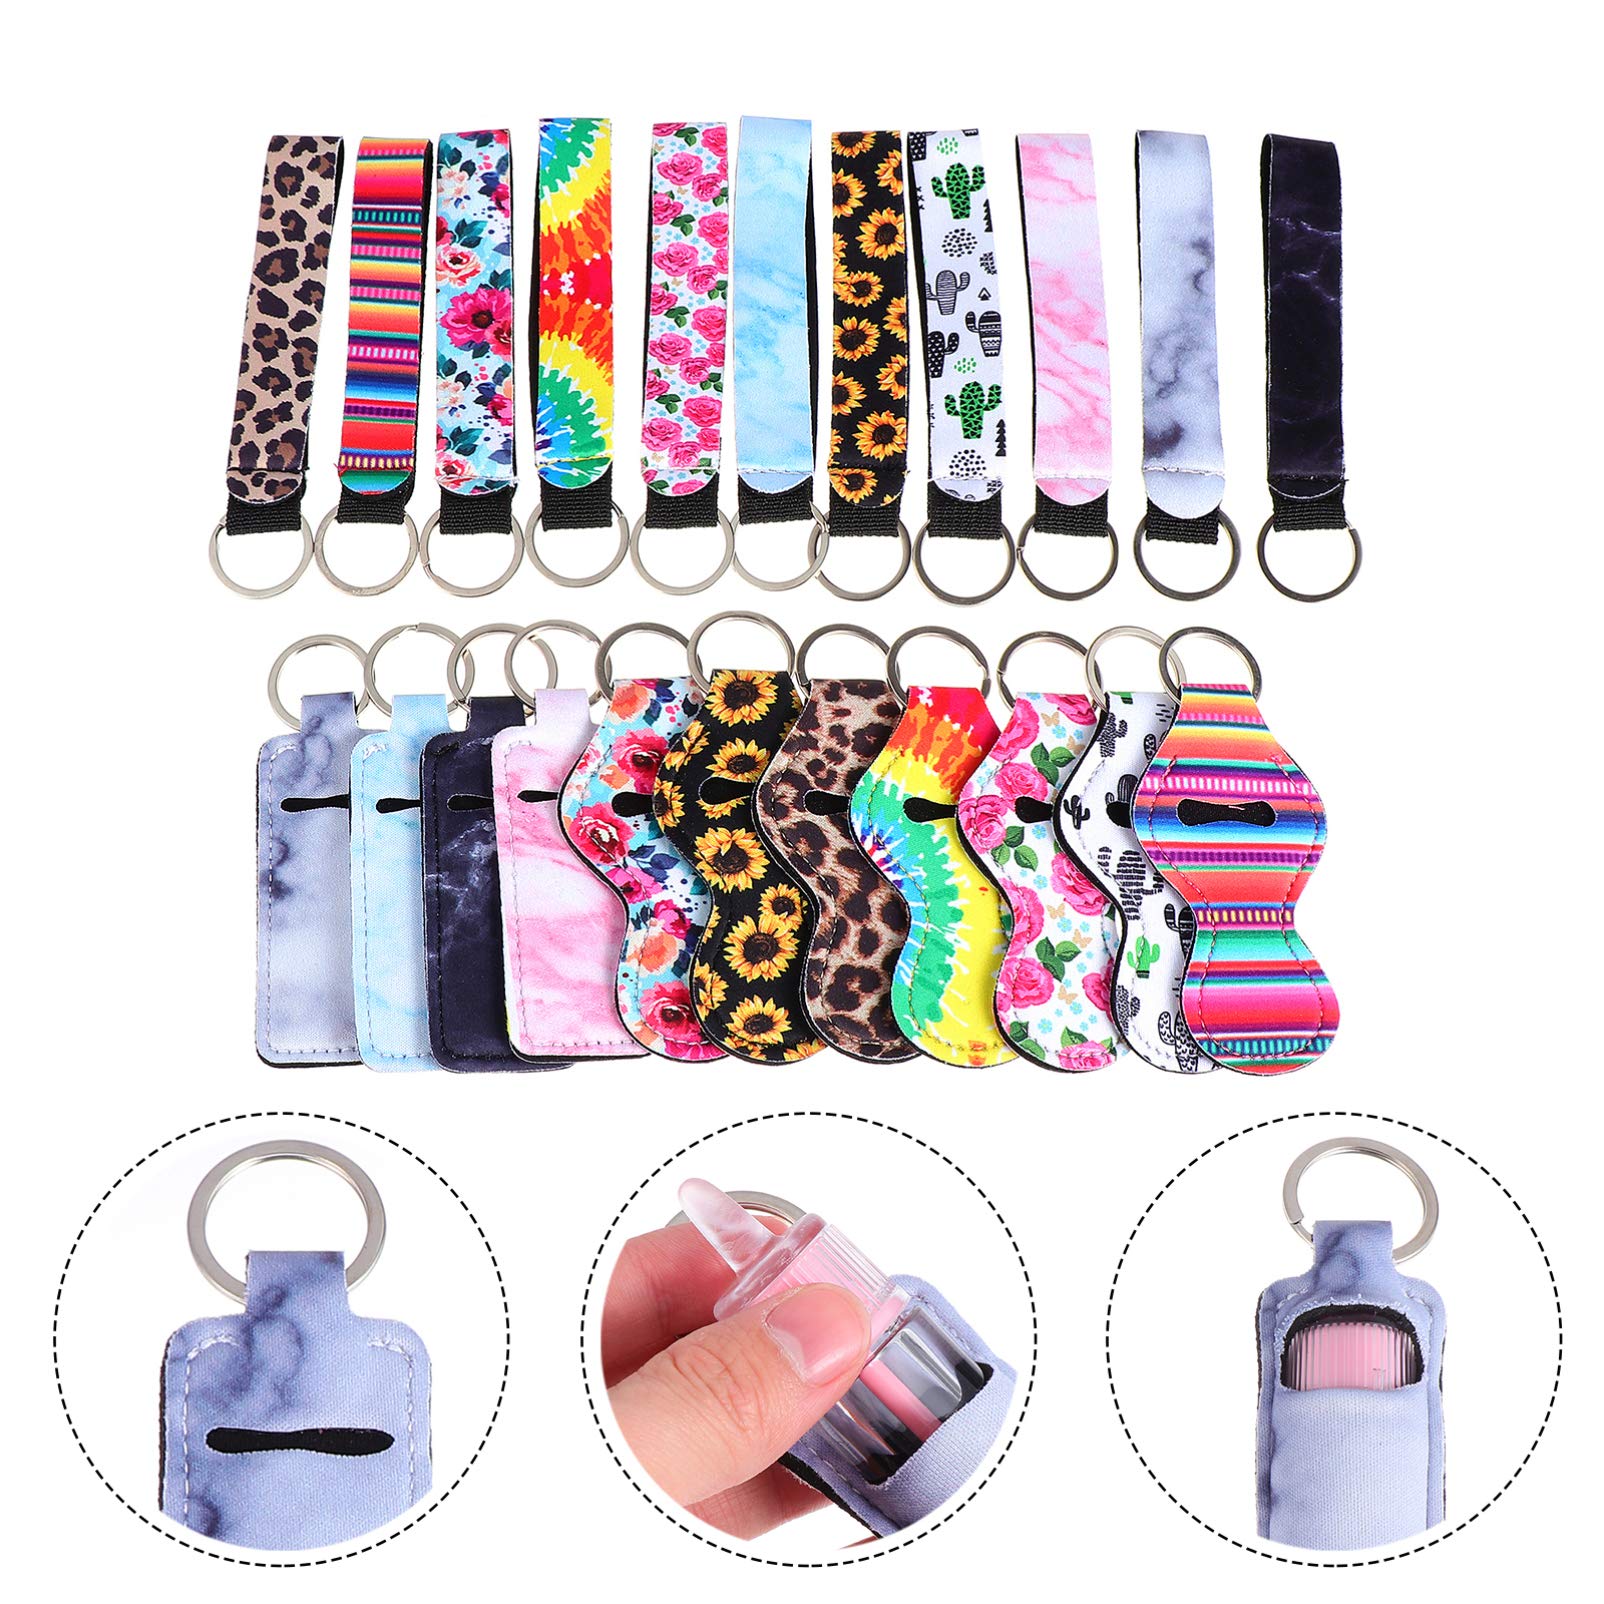 Beavorty Color Lip Balm Holders Keychains Neoprene Pouch Lip Balm Holder Lipstick Sleeve with Wristlet Lanyard Travel Accessories 22pcs Retainer Holder